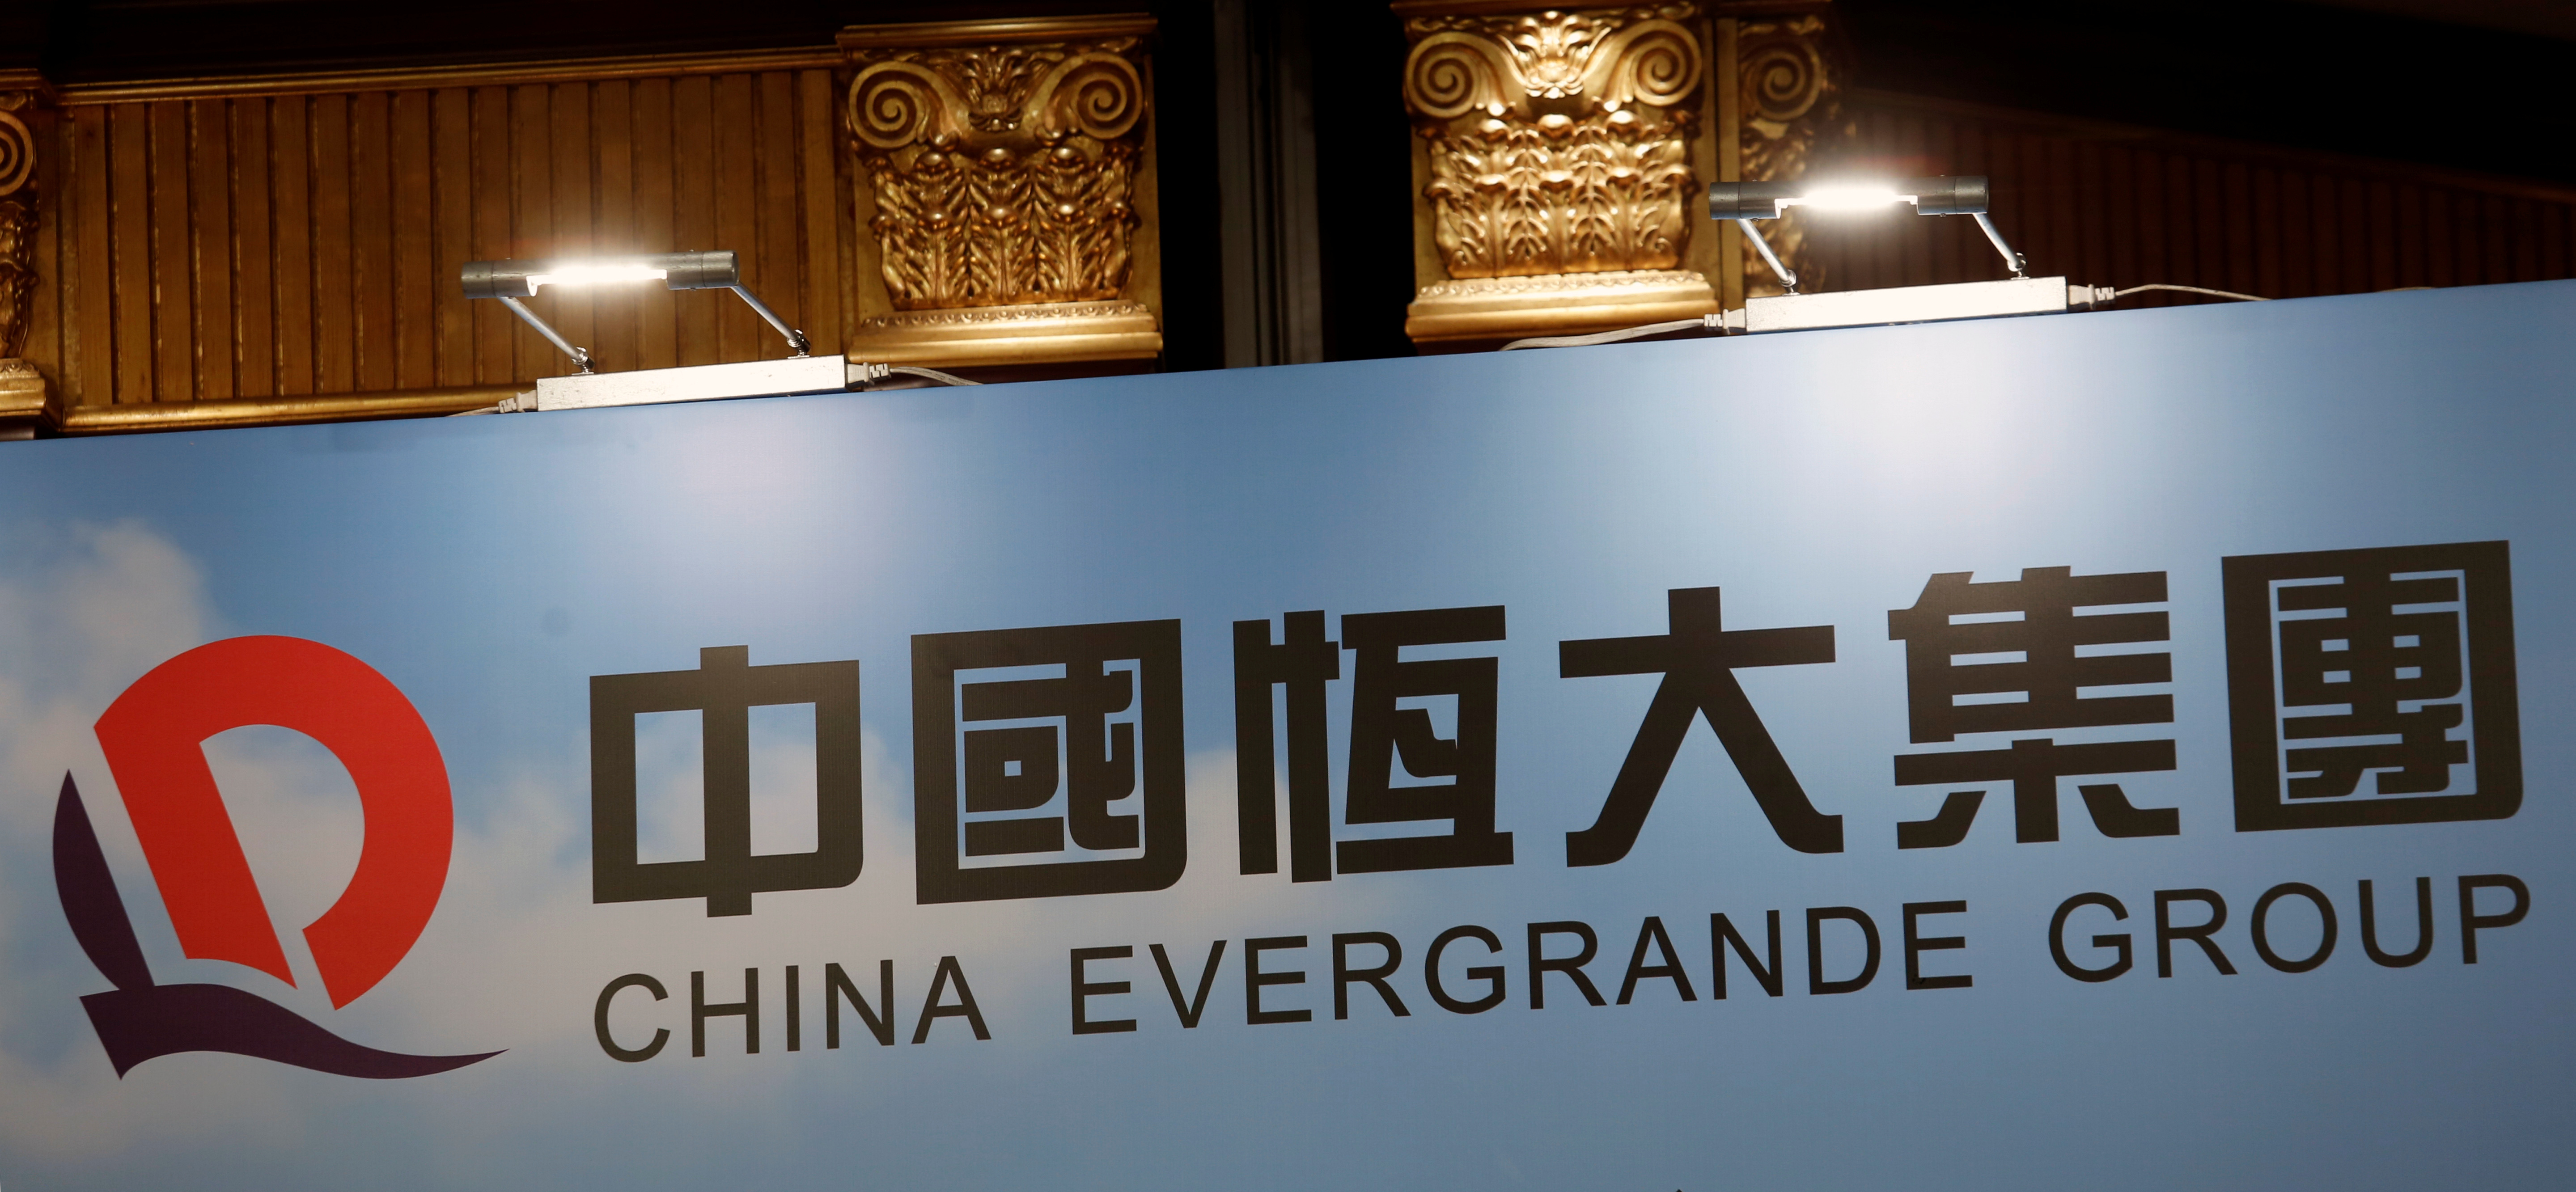 A logo of China Evergrande Group is displayed at a news conference on the property developer's annual results in Hong Kong